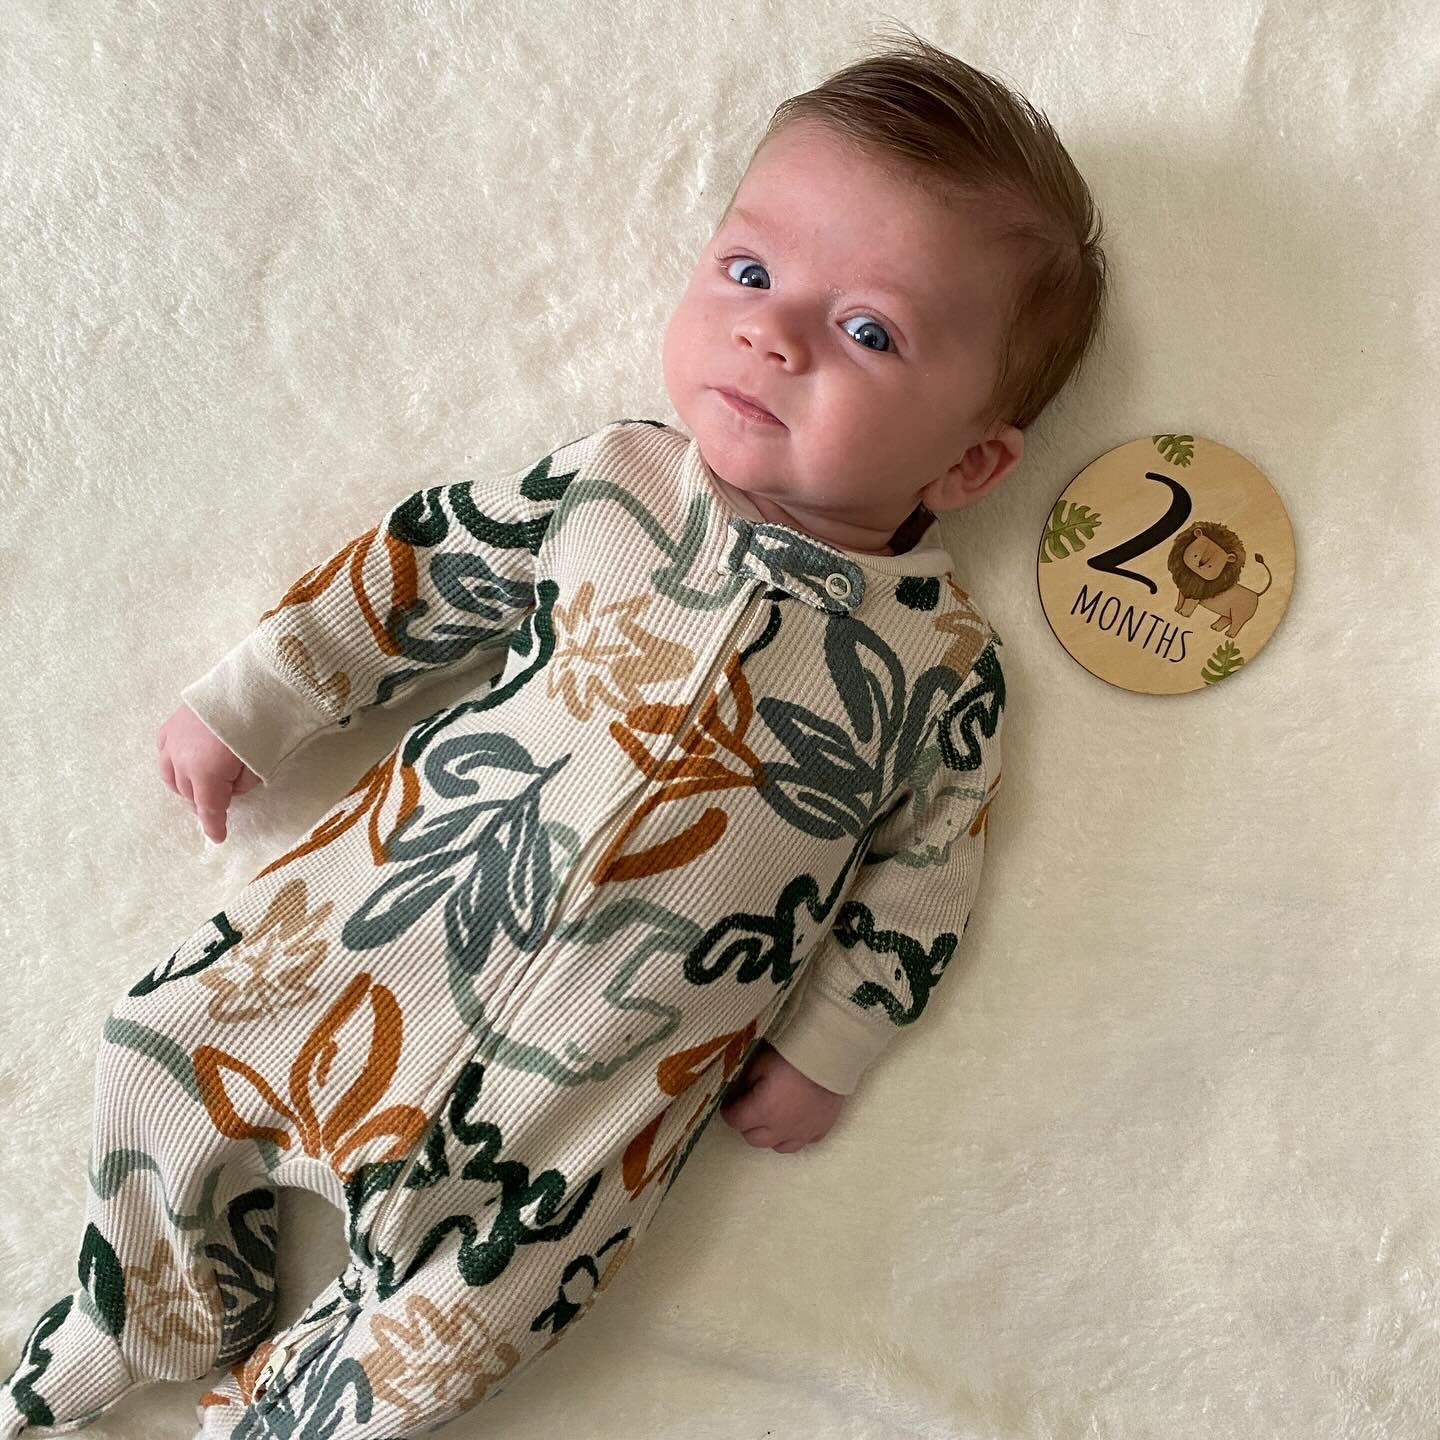 TWO MONTHS with Henry Thomas 💙 Henry is a big fan of eating and NOT a big fan of burping 😂 He loves to look in the mirror and has lots of smiles to share with Mommy and Daddy. We can't believe he's already two months old, and we're so excited to se